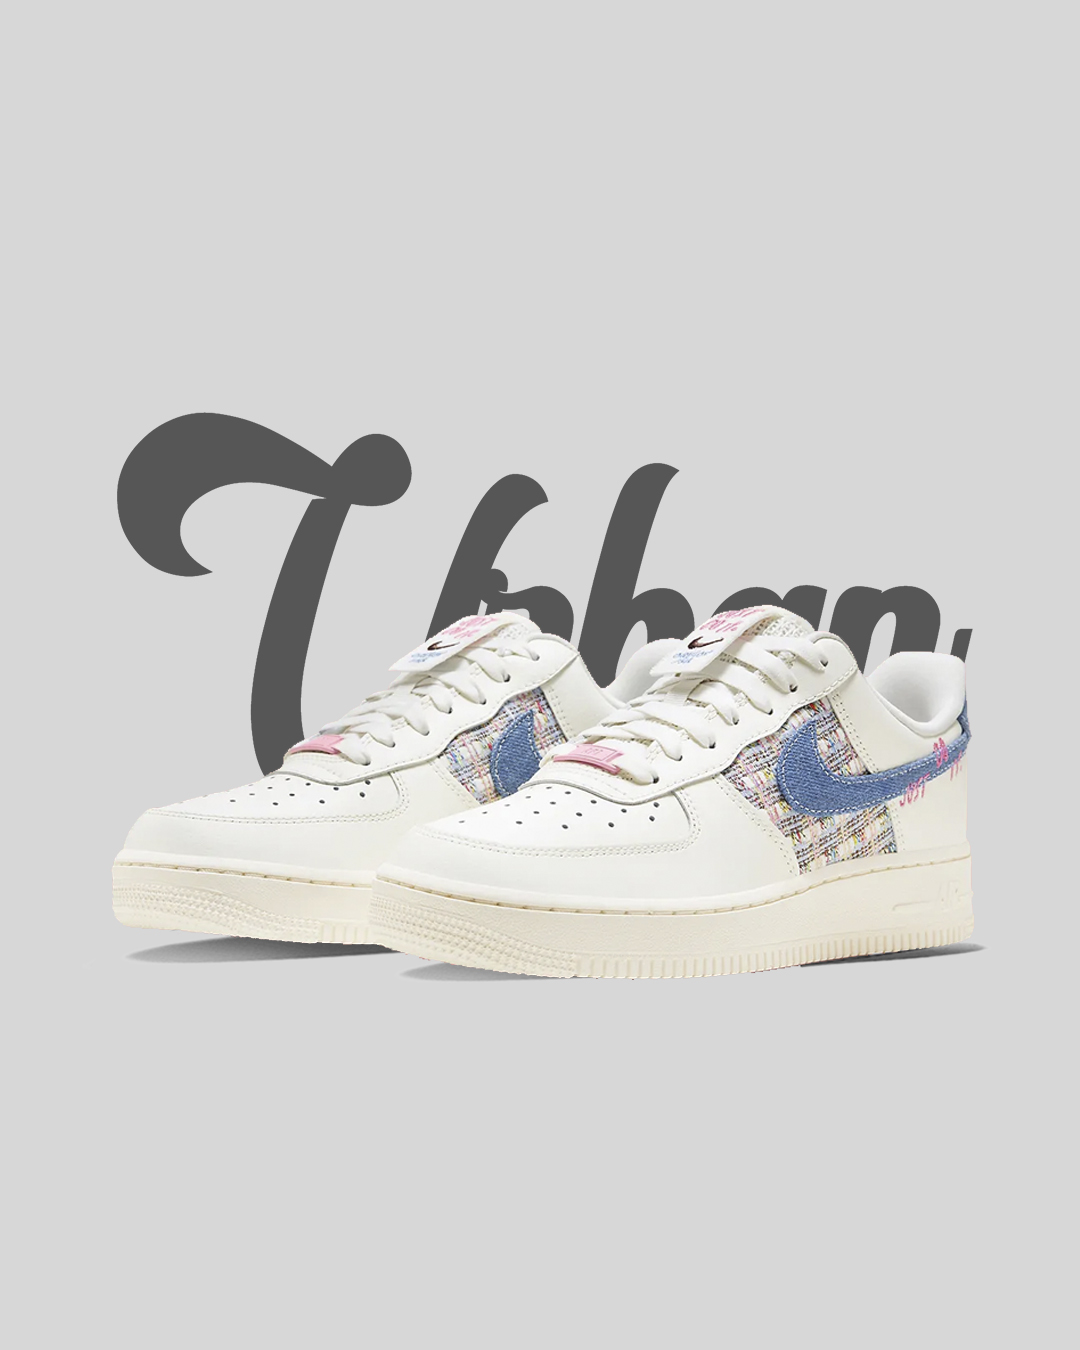 Nike Air Force 1 Low ’07 LX Denim Swoosh Boucle – Urban Collection